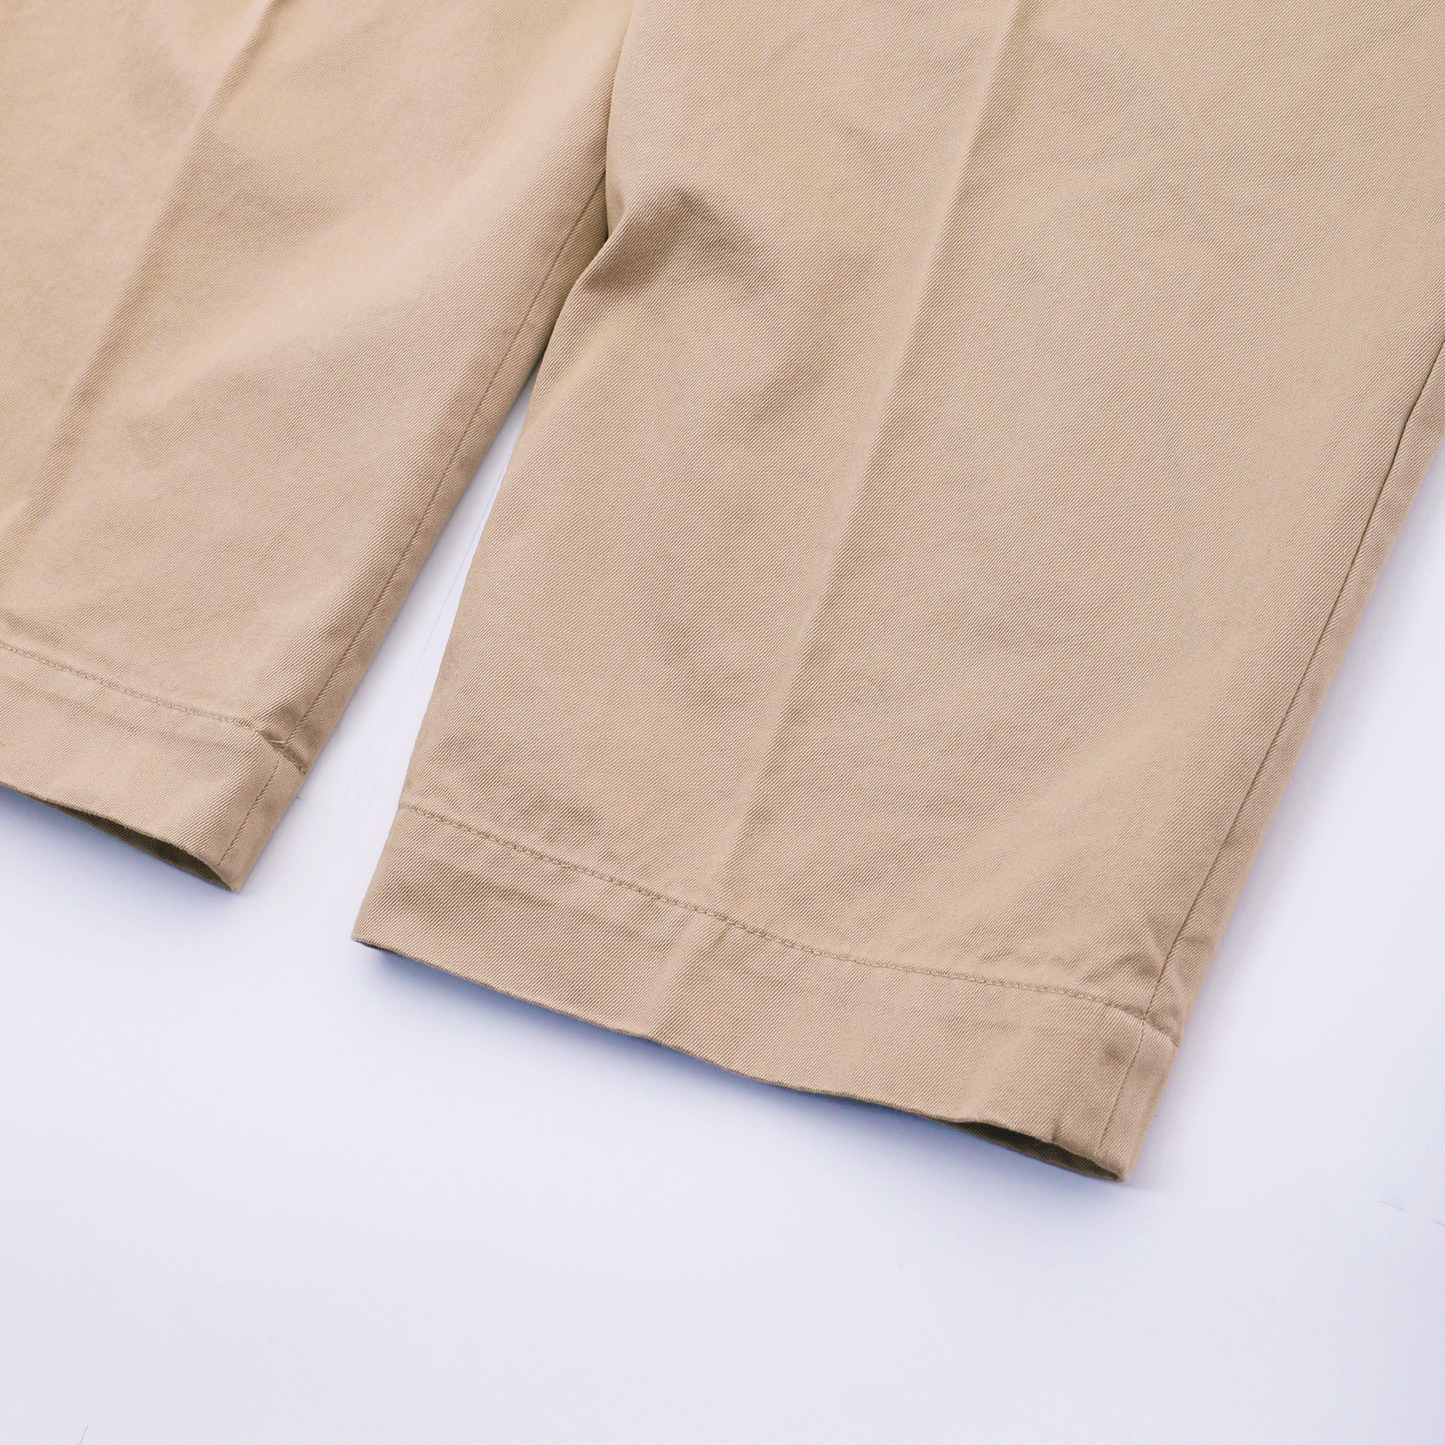 WEST POINT OFFICER PANT